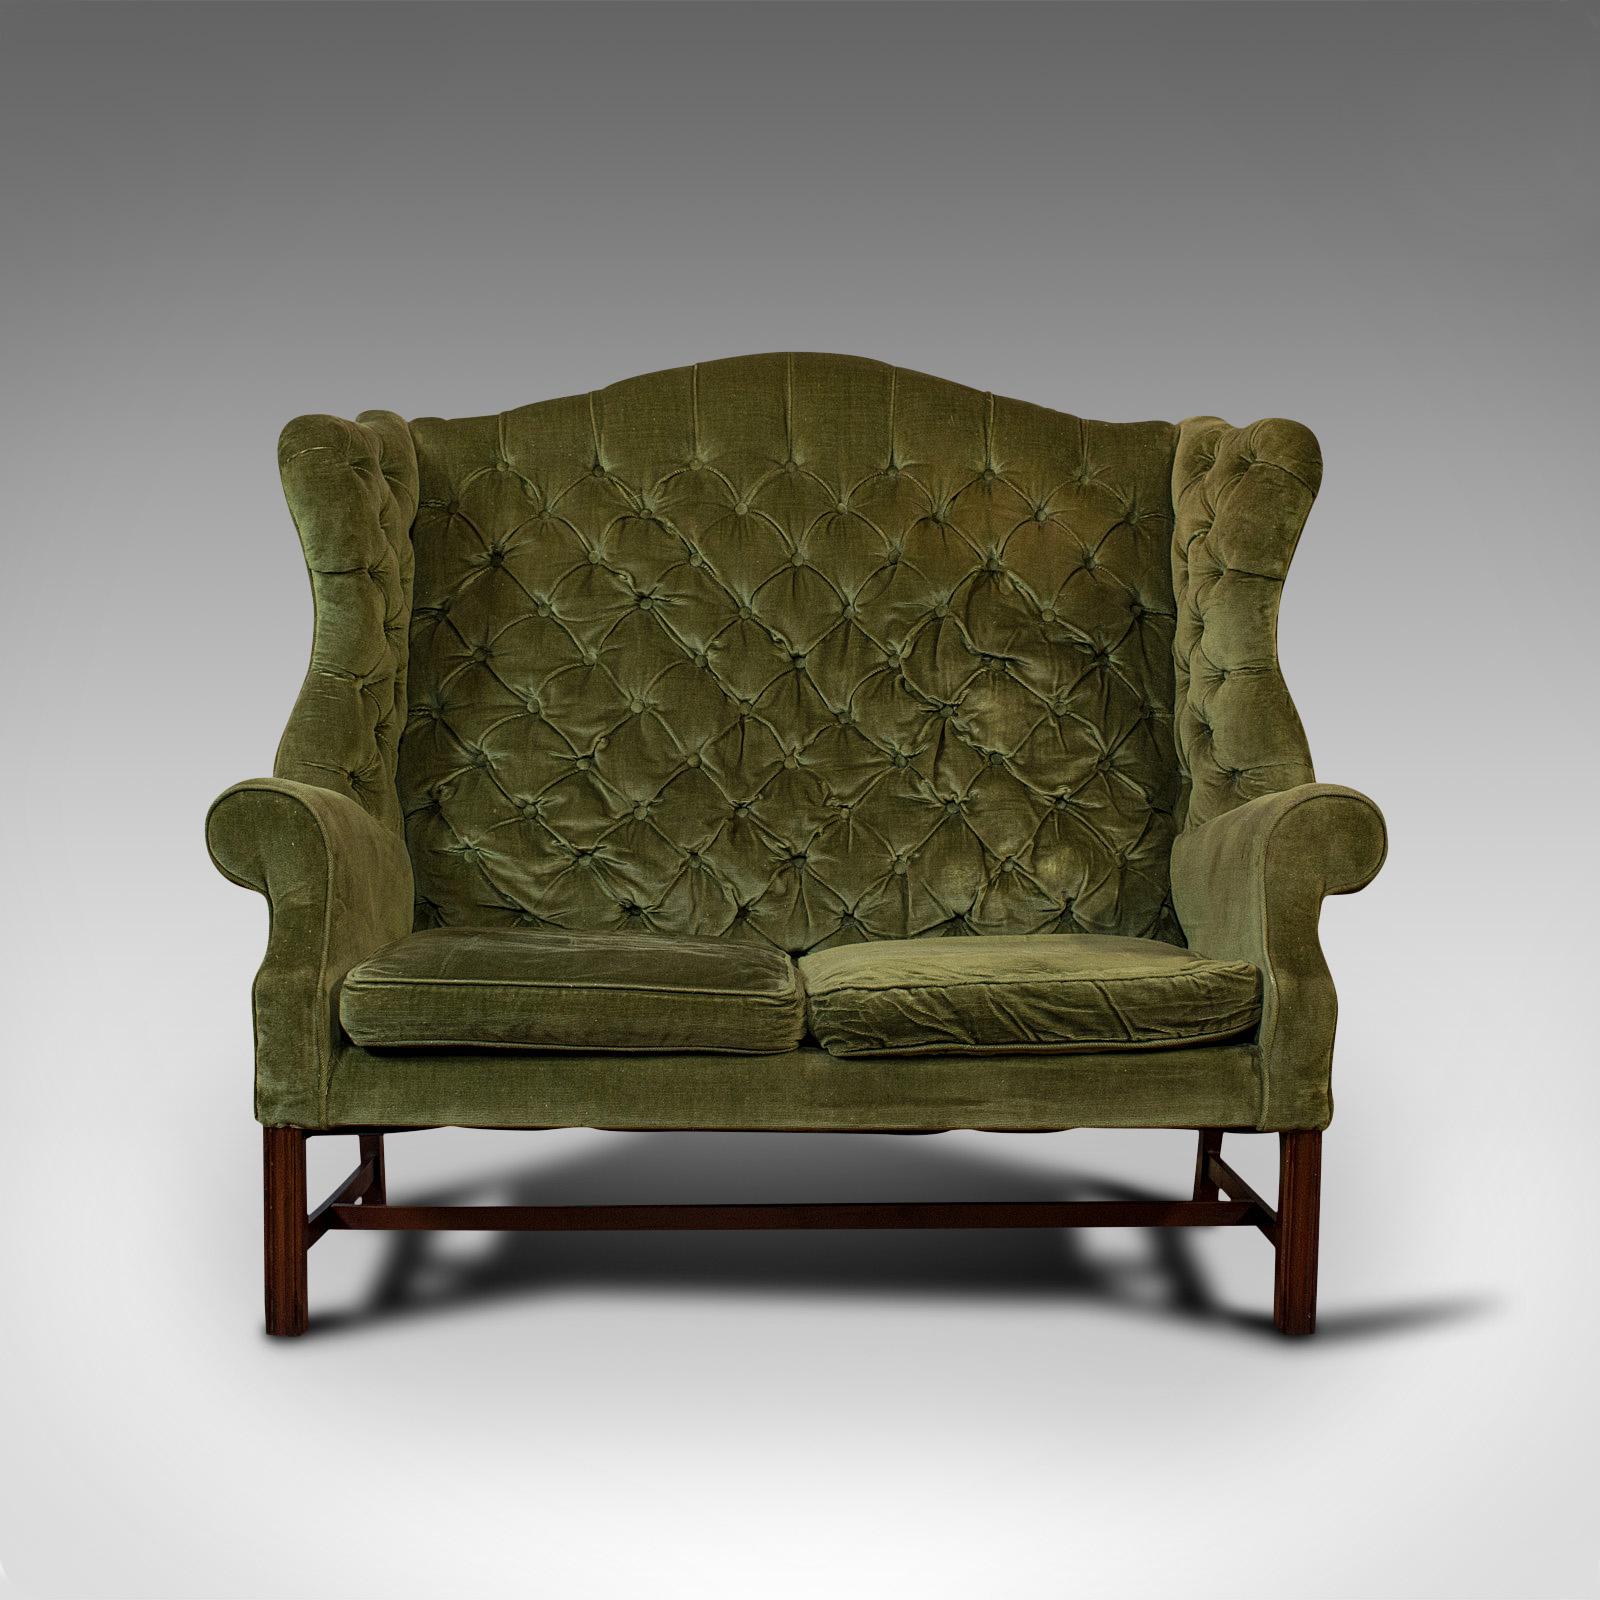 This is an antique high wing-back settee. An English, upholstered sofa or love seat over a beech frame, dating to the Edwardian period, circa 1910.

Inviting ivy green hues and attractive wing-back form
Displaying a desirable aged patina
Quality